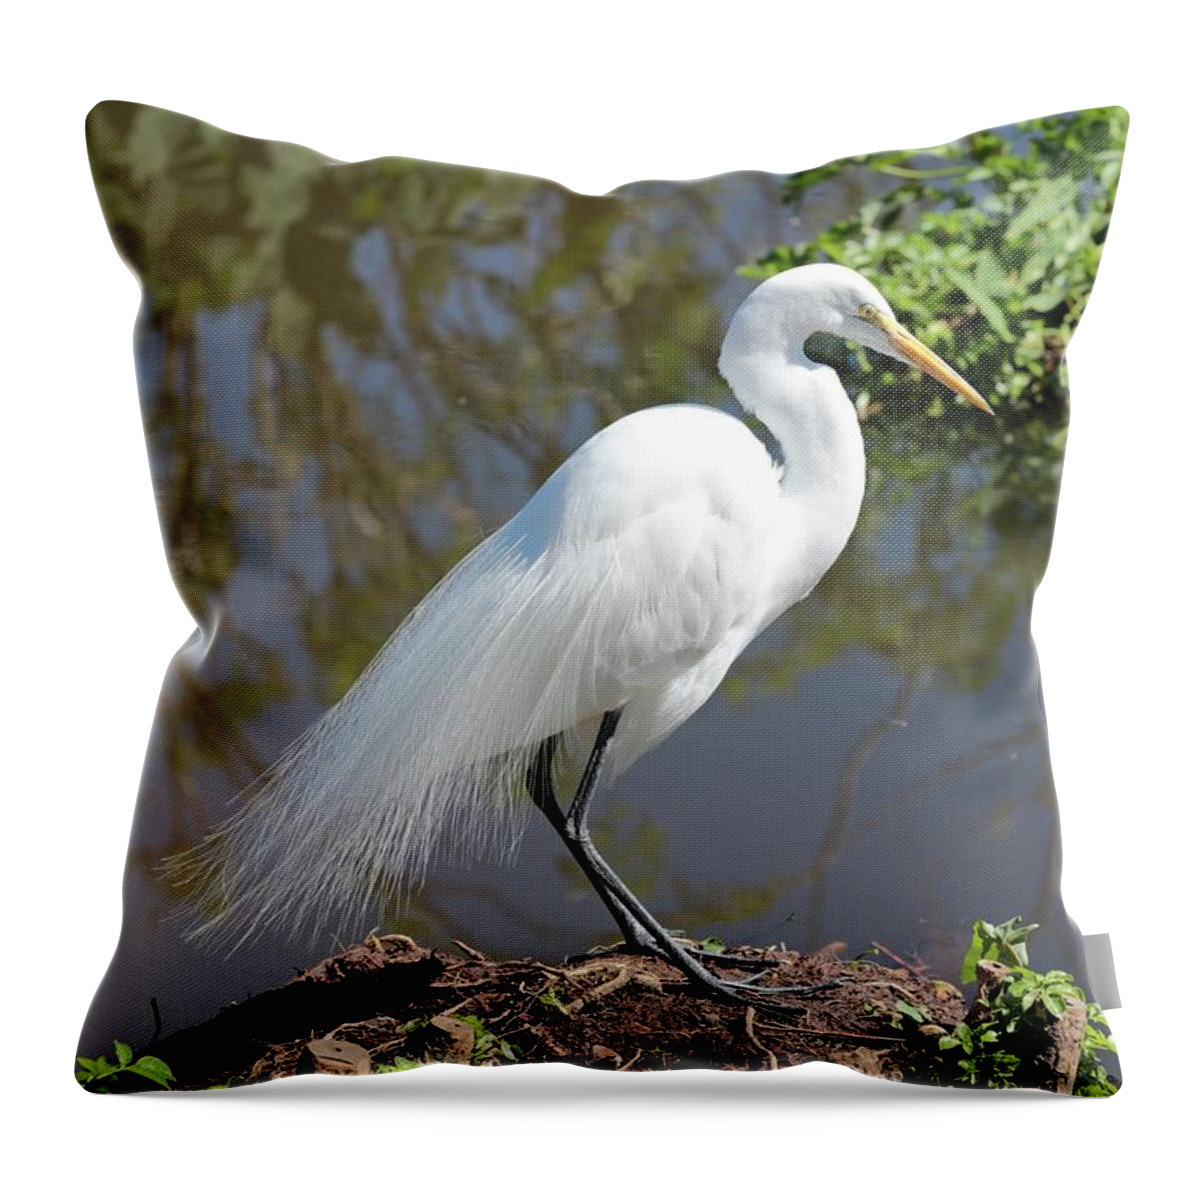 Great Egret Throw Pillow featuring the photograph Dreamy Great Egret by Carol Groenen